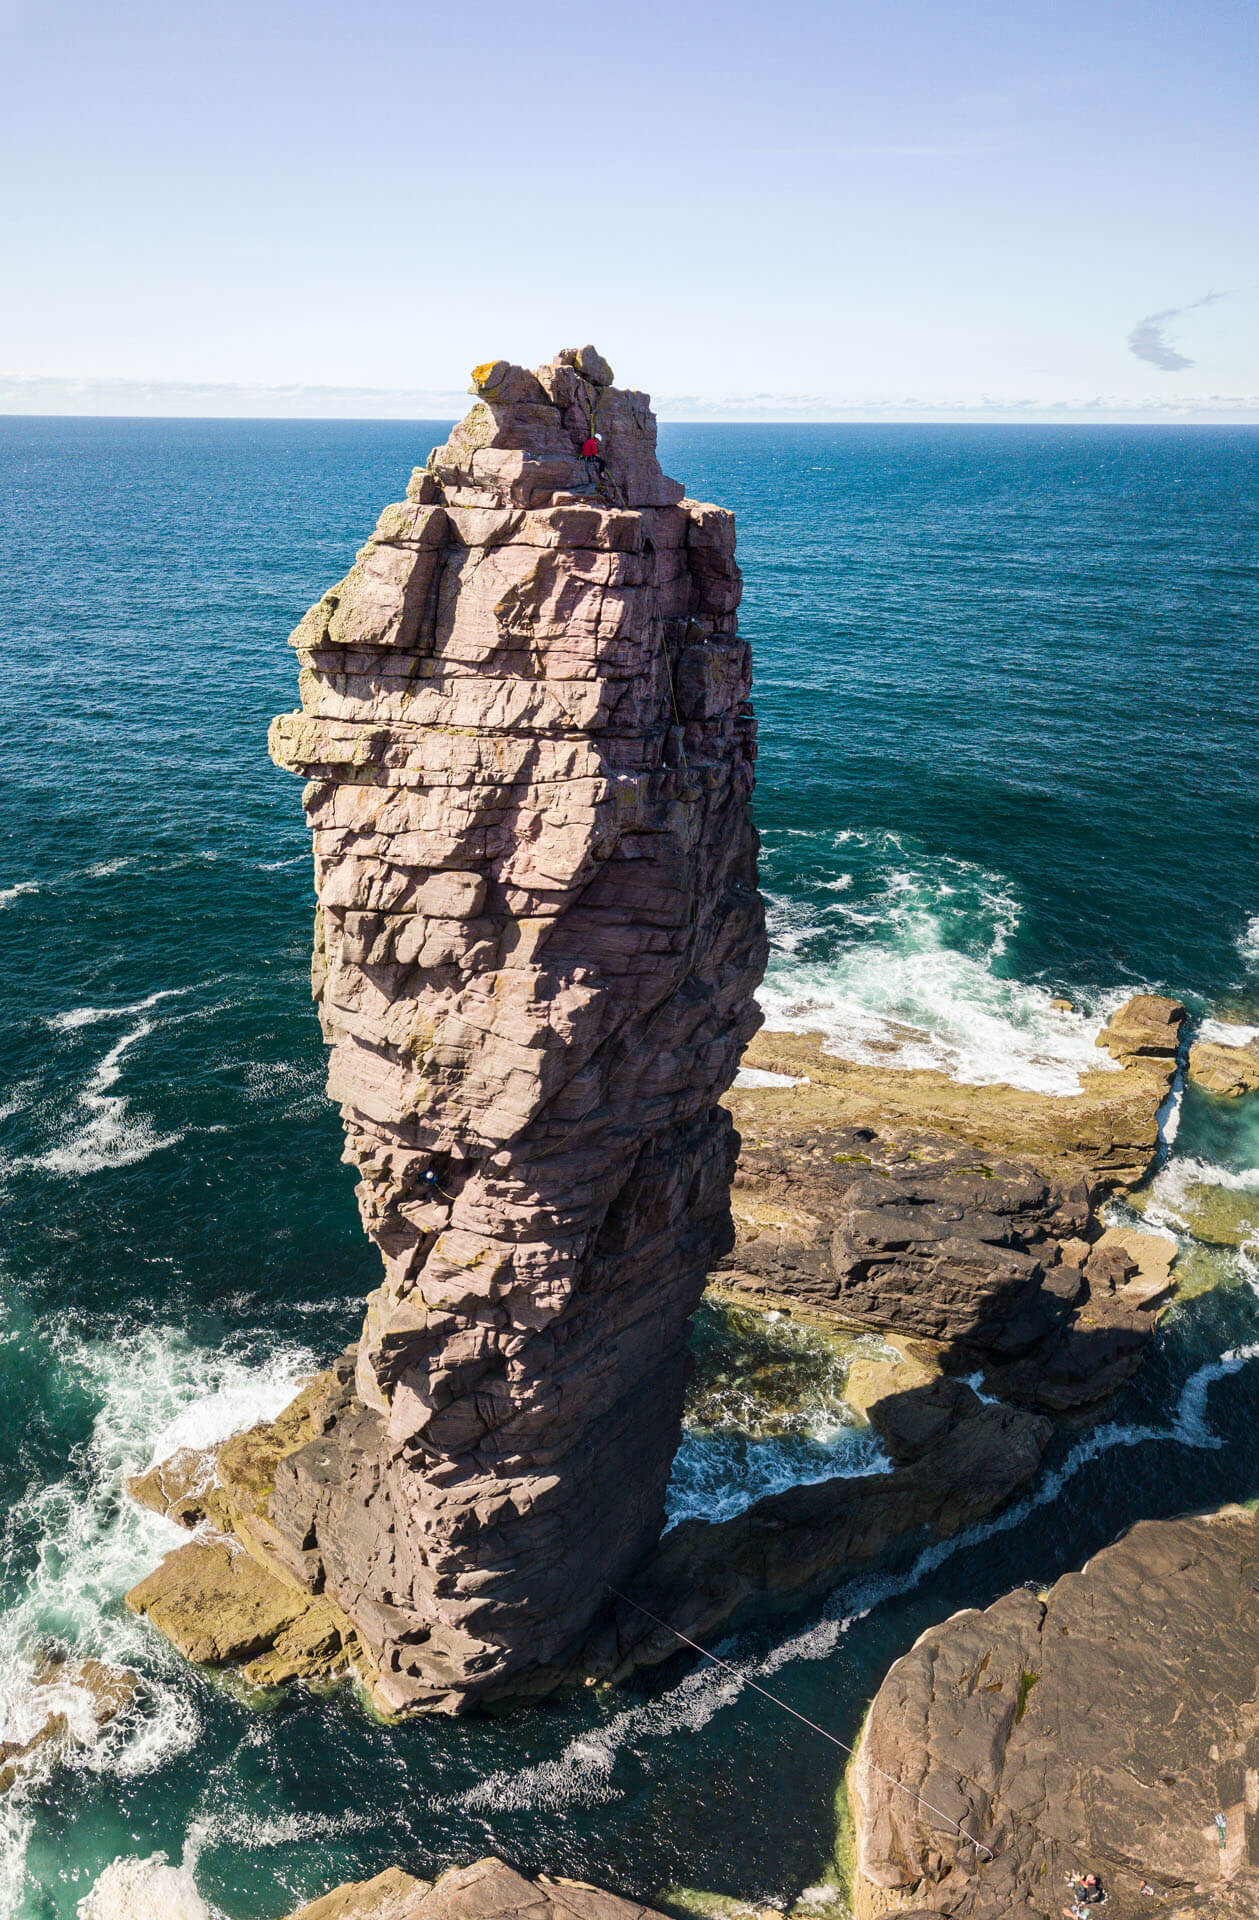 Climbers on the Old Man of Stoer